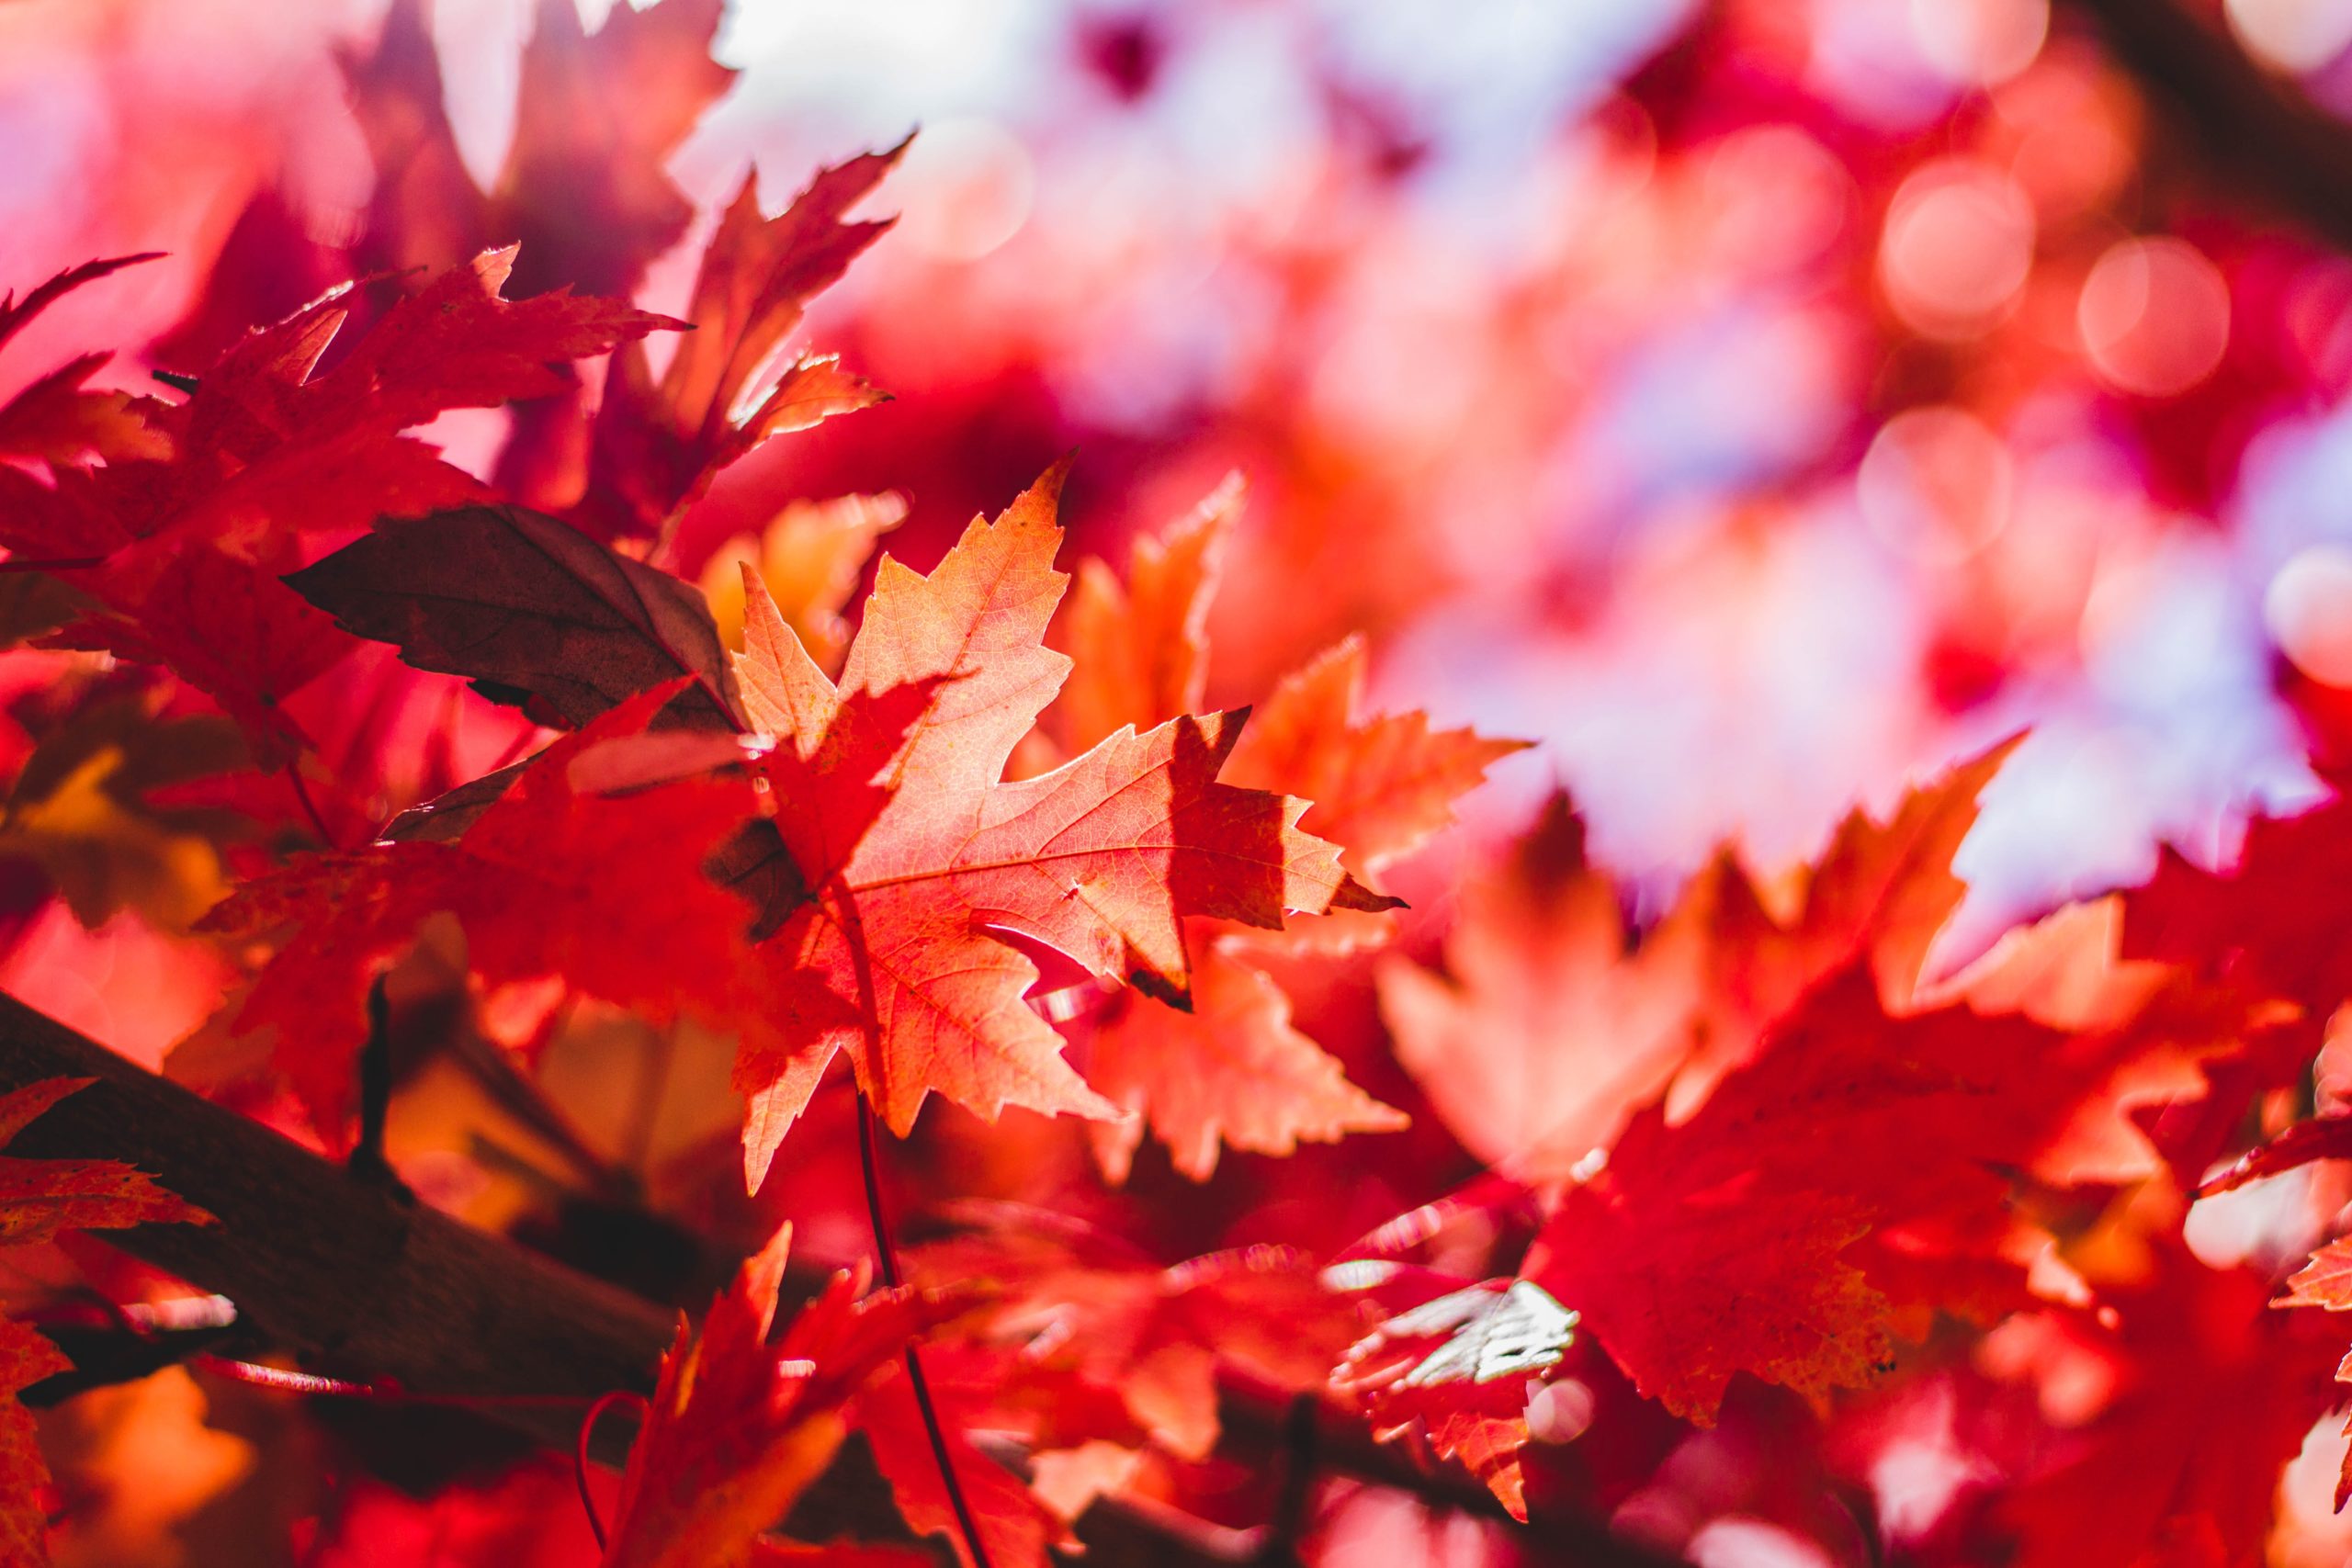 [ID red autumn leaves] How to Pay Attention, for Writers